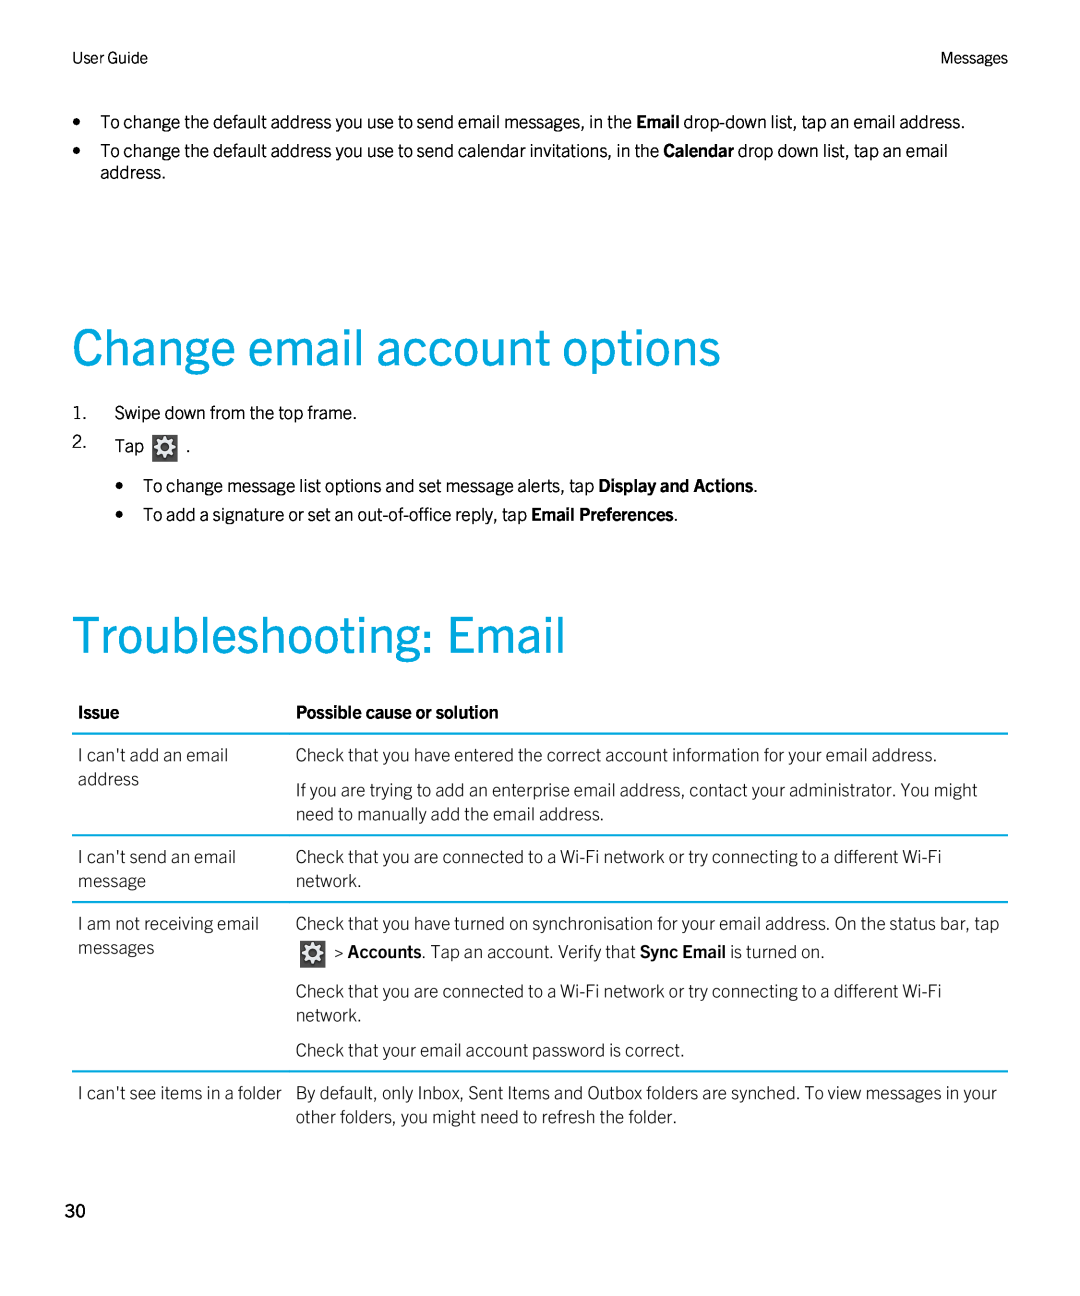 Blackberry 2.0.1 manual Change email account options, Troubleshooting Email, Issue 